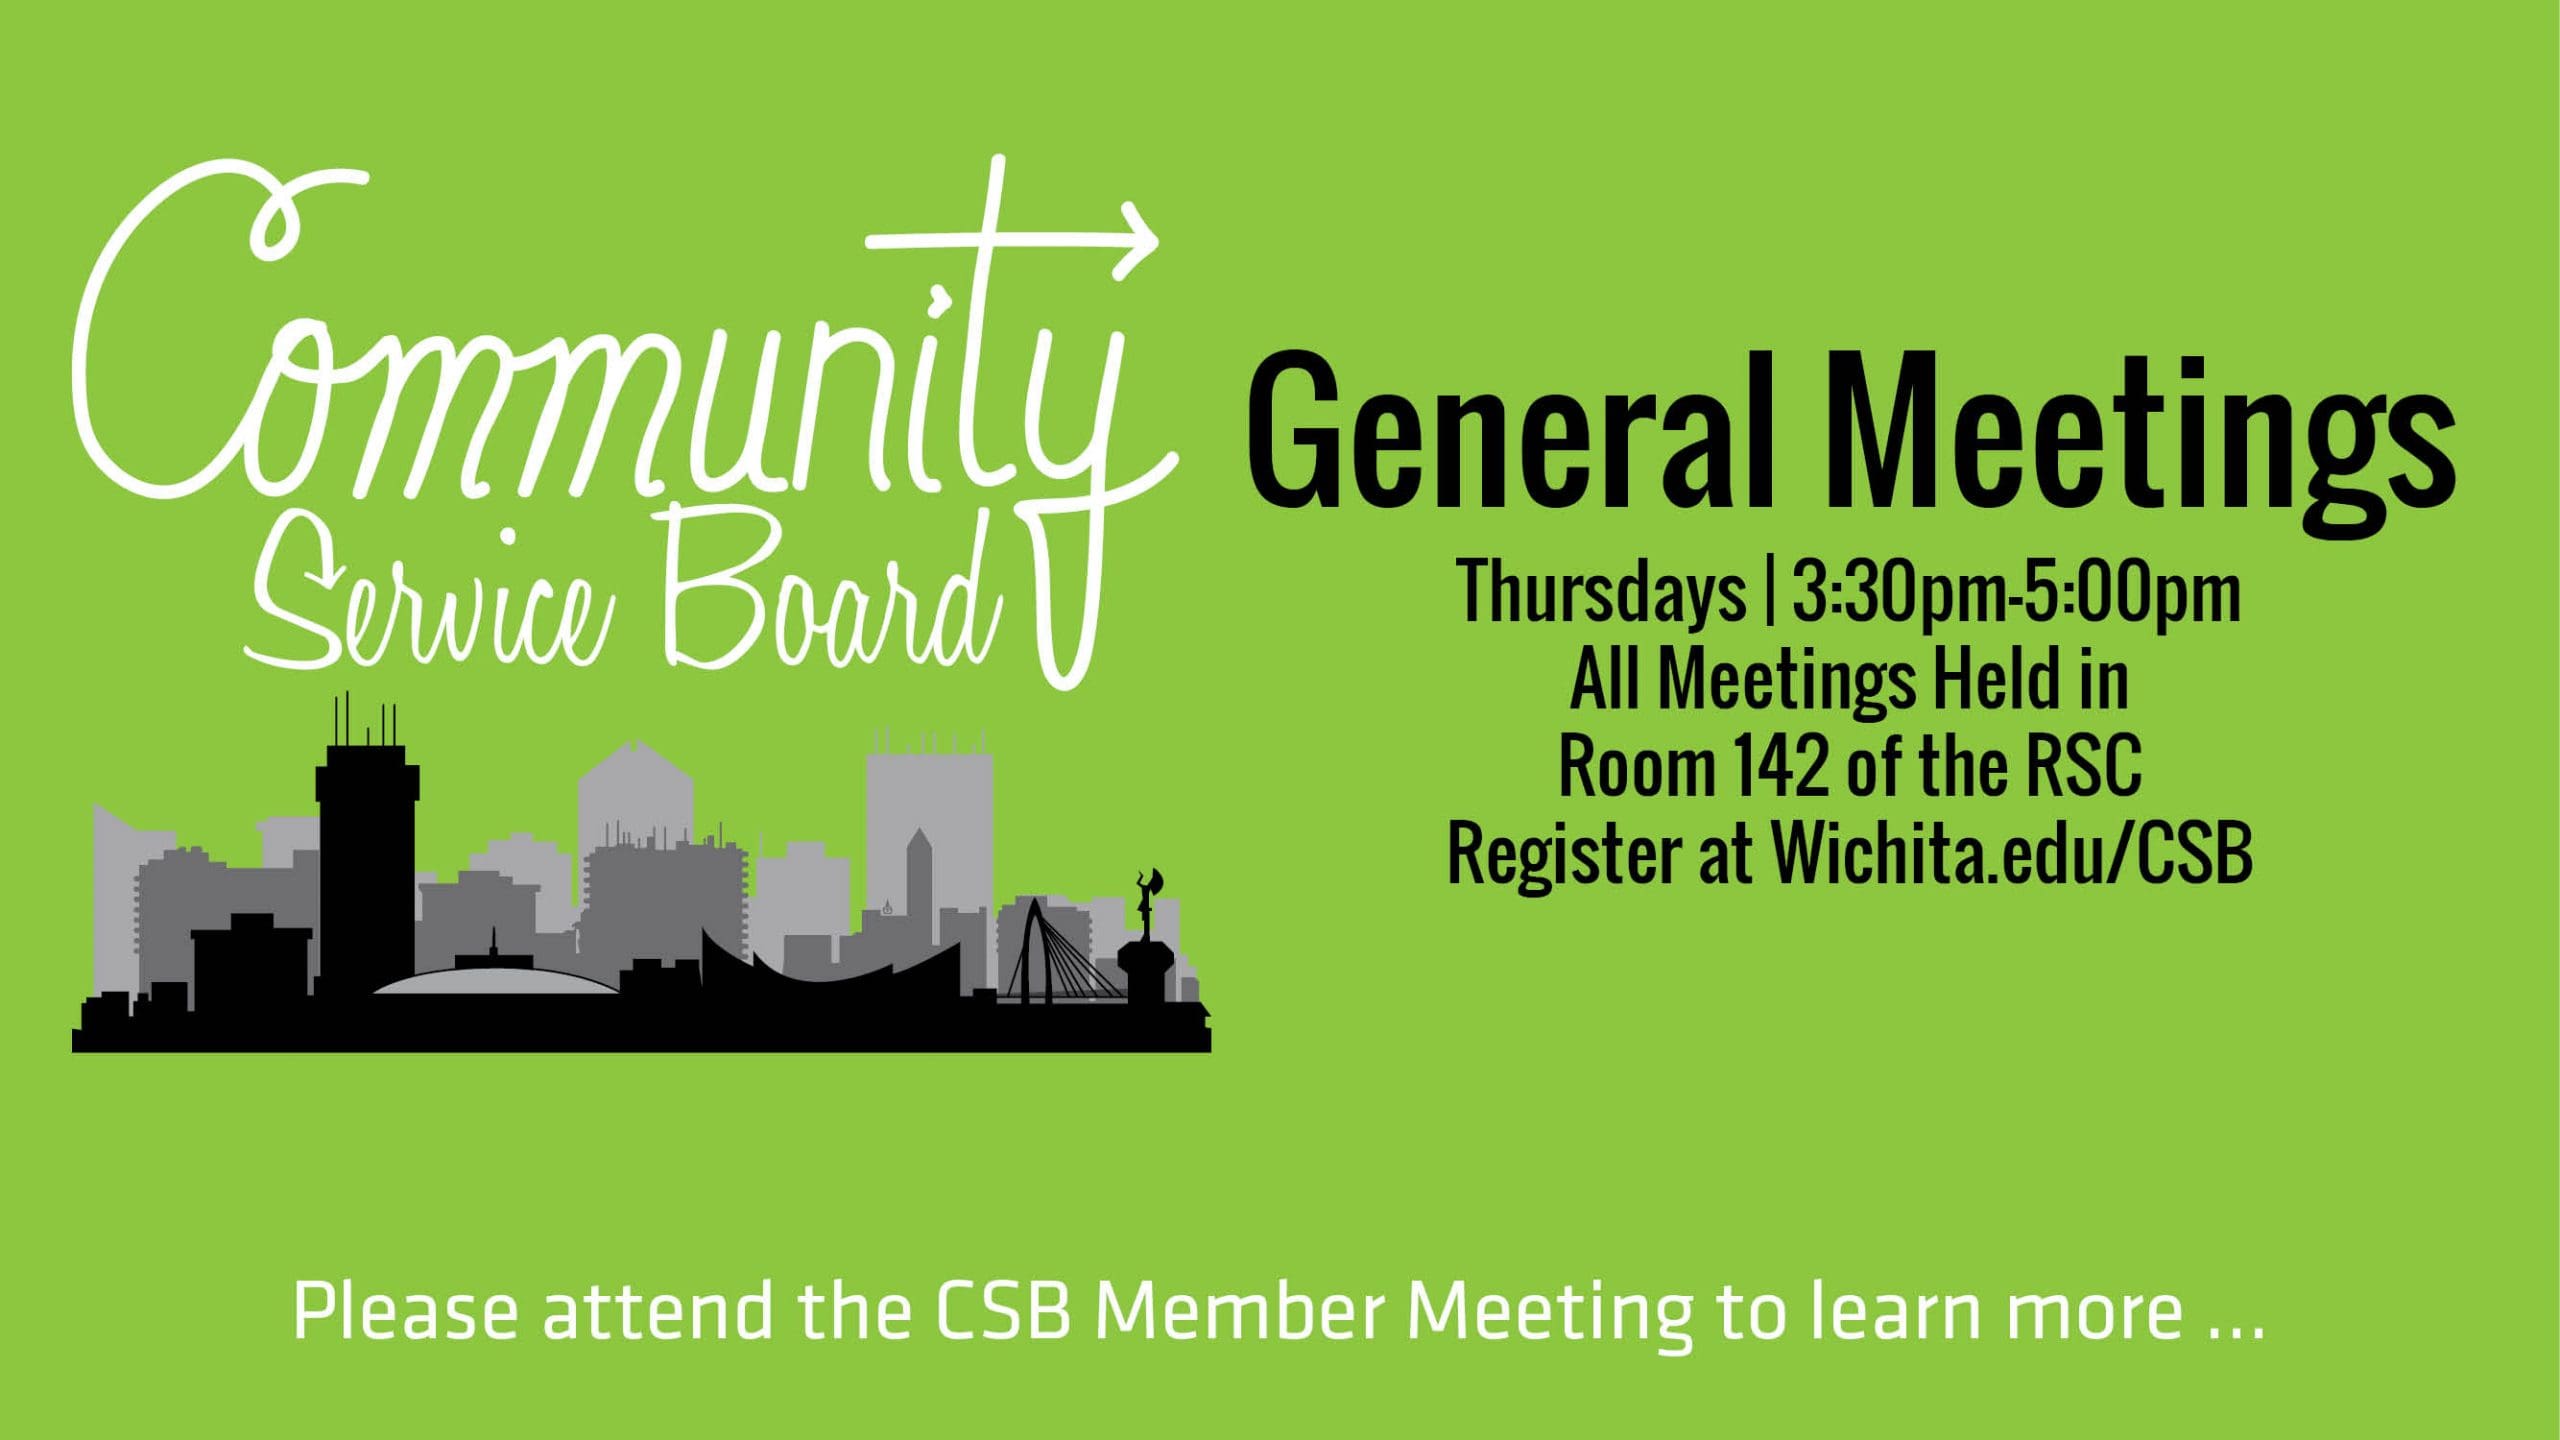 Community Service Board, General Meetings take place on Thursdays at 3:30 p.m. in Room 142 of the RSC. Students may register at wichita.edu/csb. Please attend meetings to learn more.